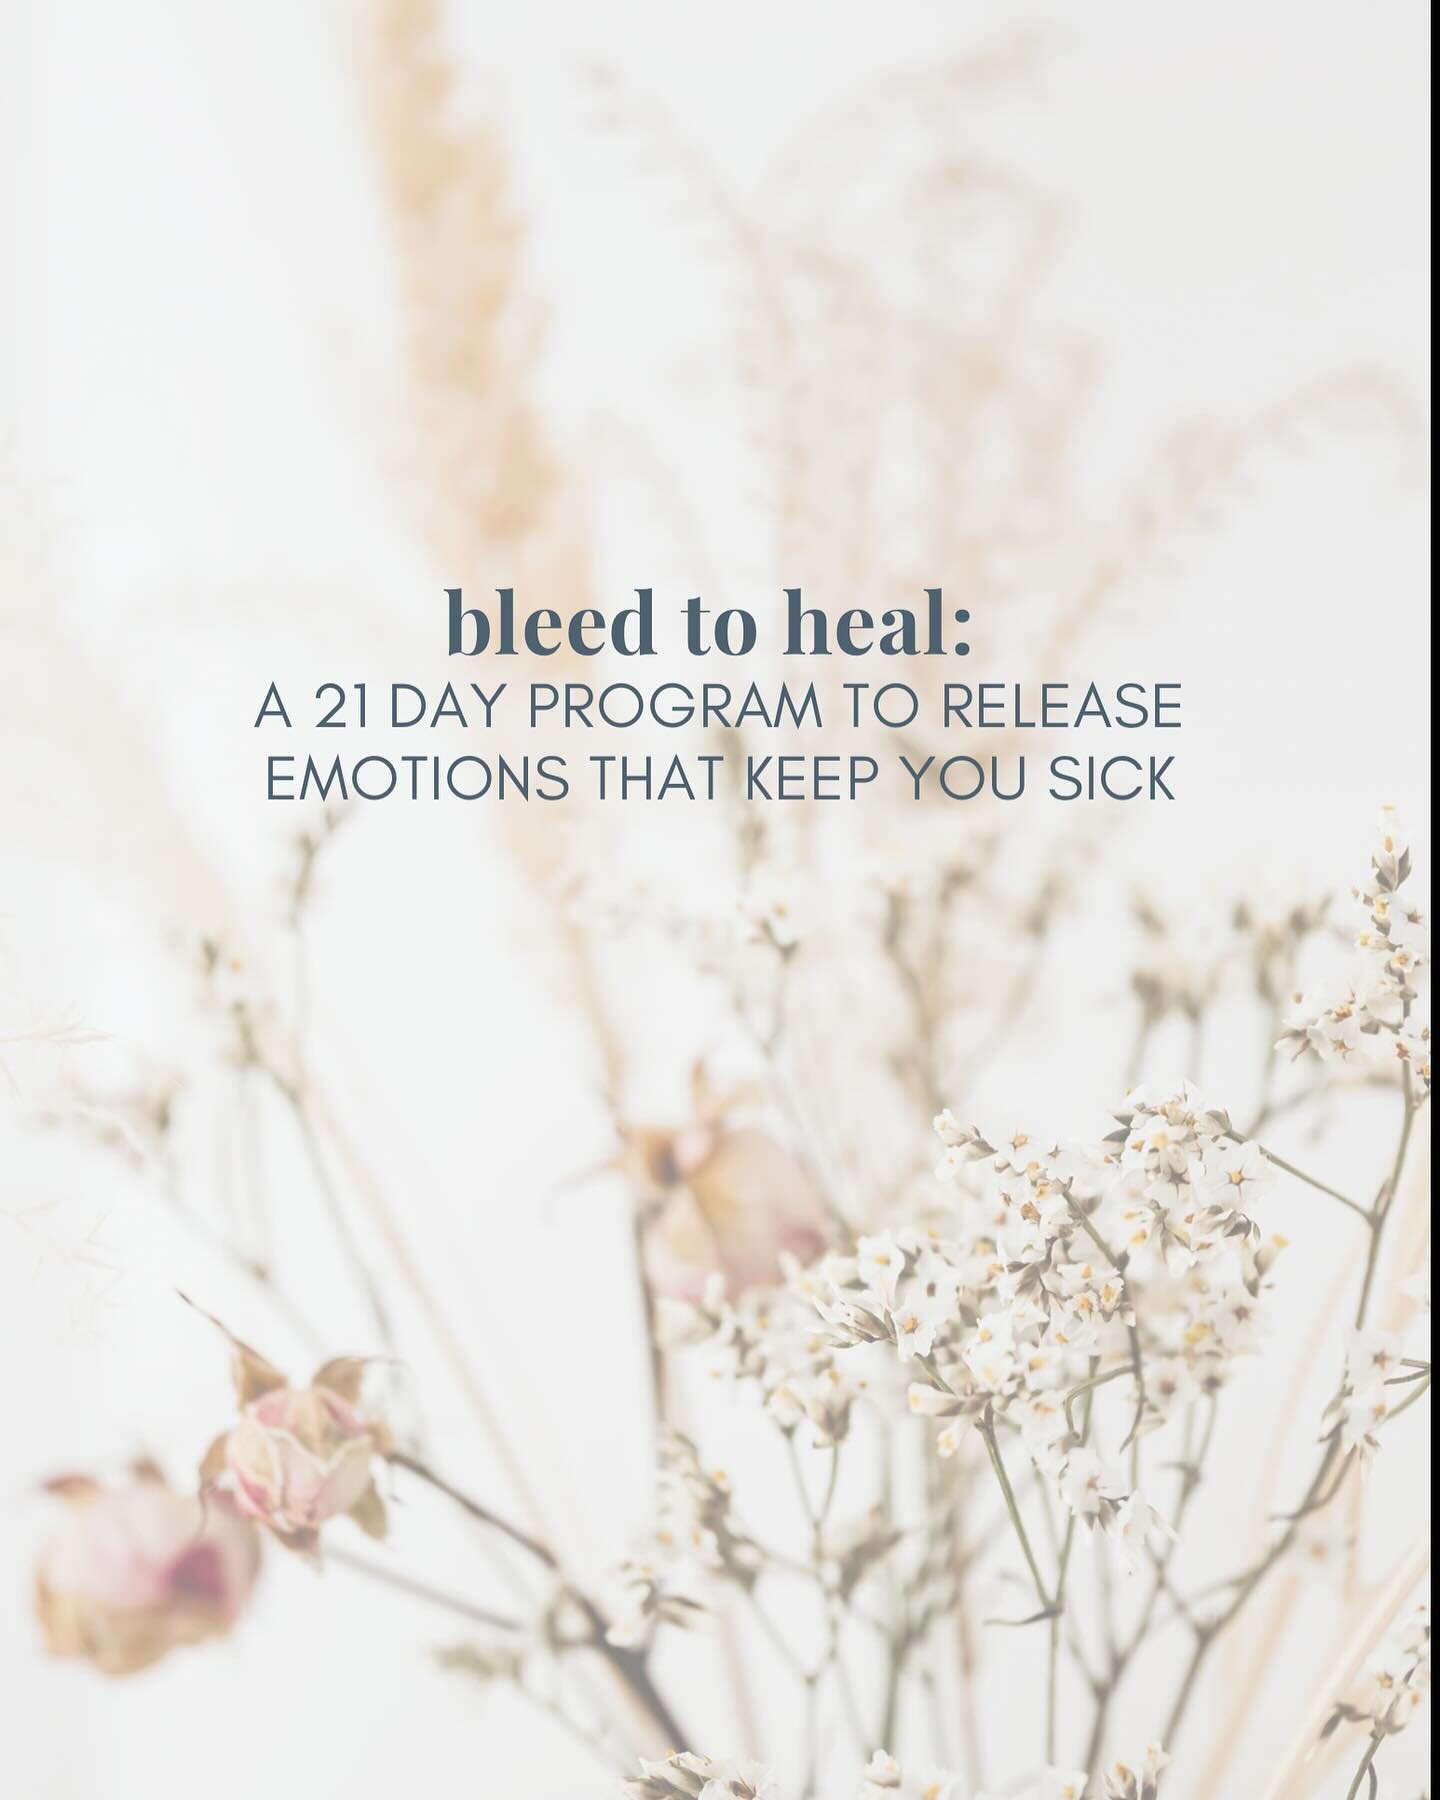 Launching April 1 on my Website✨✨✨

If you&rsquo;re new around here, welcome👋👋

Bleed to Heal is a mini class that will teach you to give yourself luo treatments, which is where we use a lancet on a point to release emotion stored in the blood that